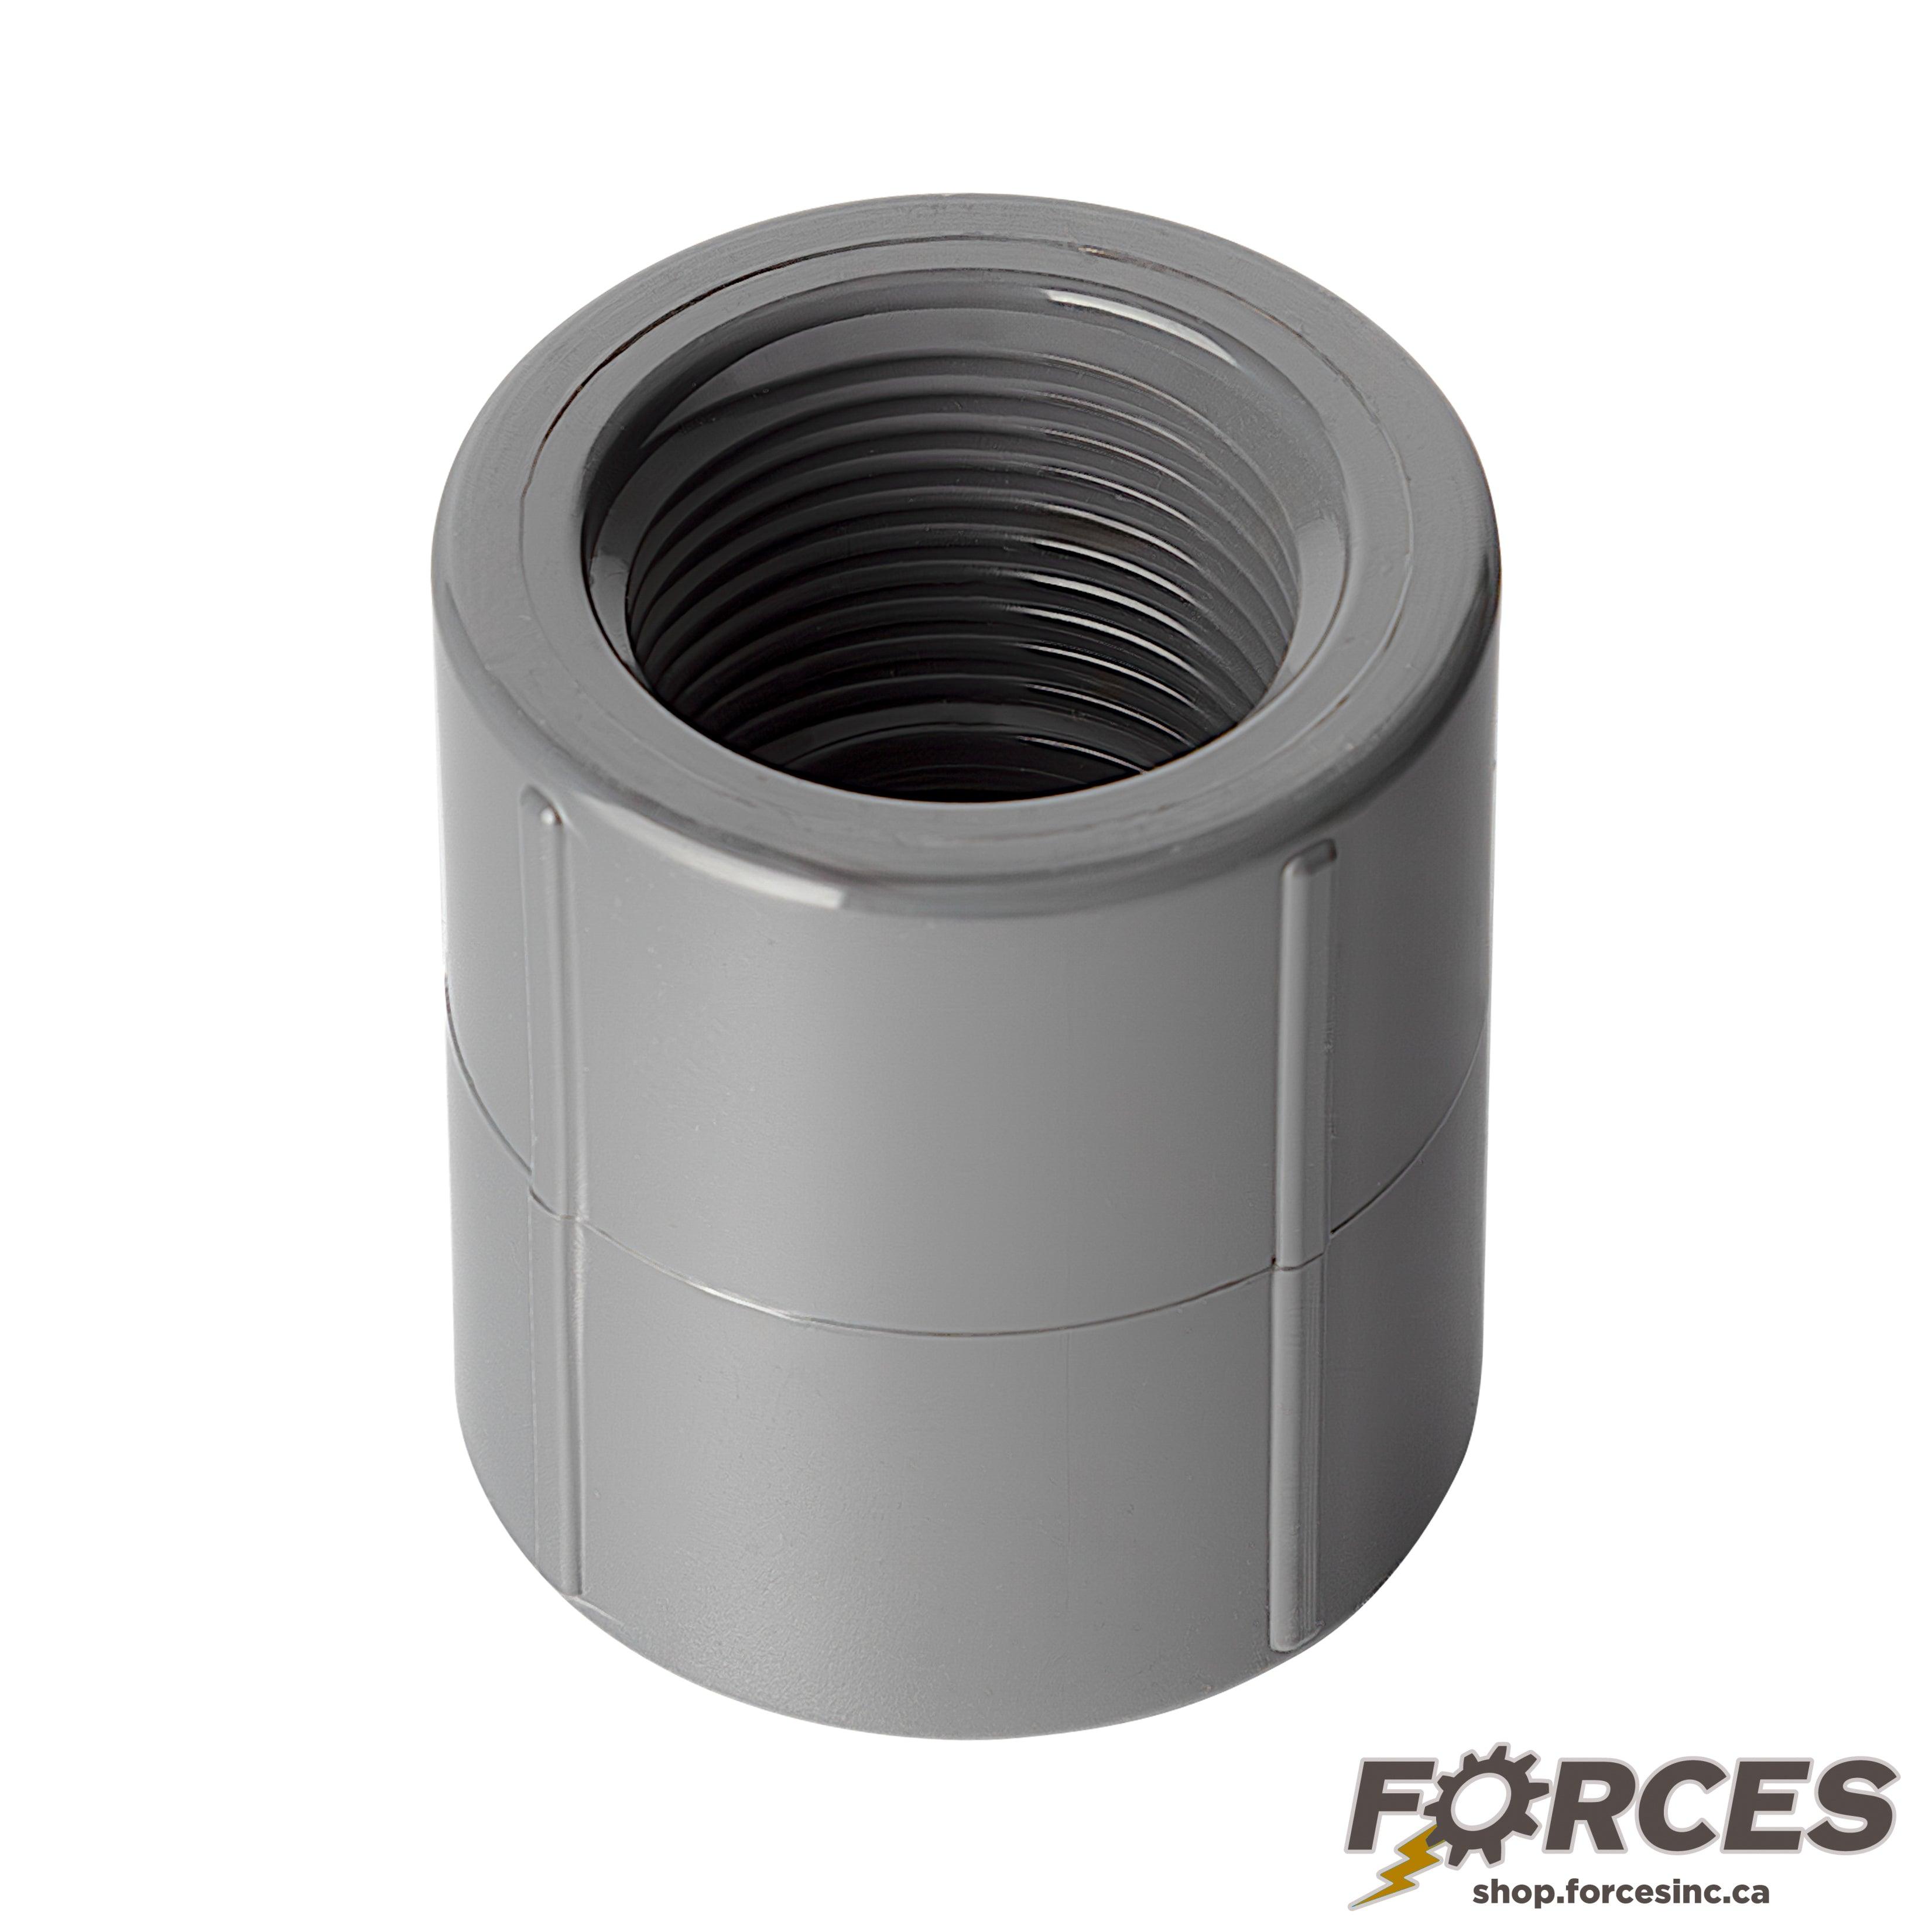 1-1/2" Coupling (Threaded) Sch 80 - PVC Grey | 830015 - Forces Inc